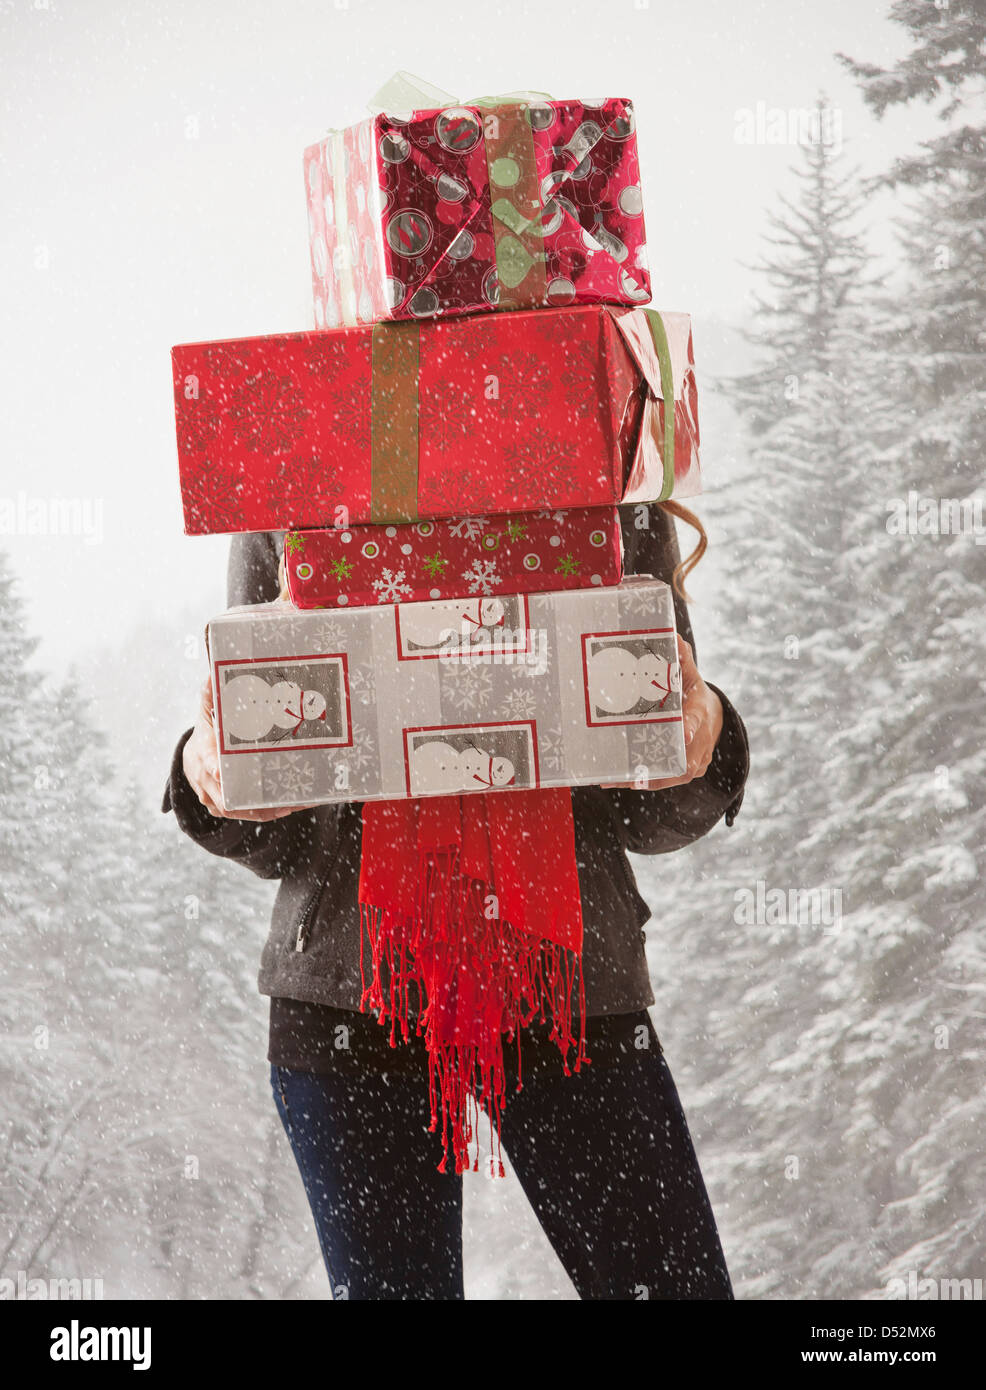 Mixed race woman holding stack of presents in snow Stock Photo